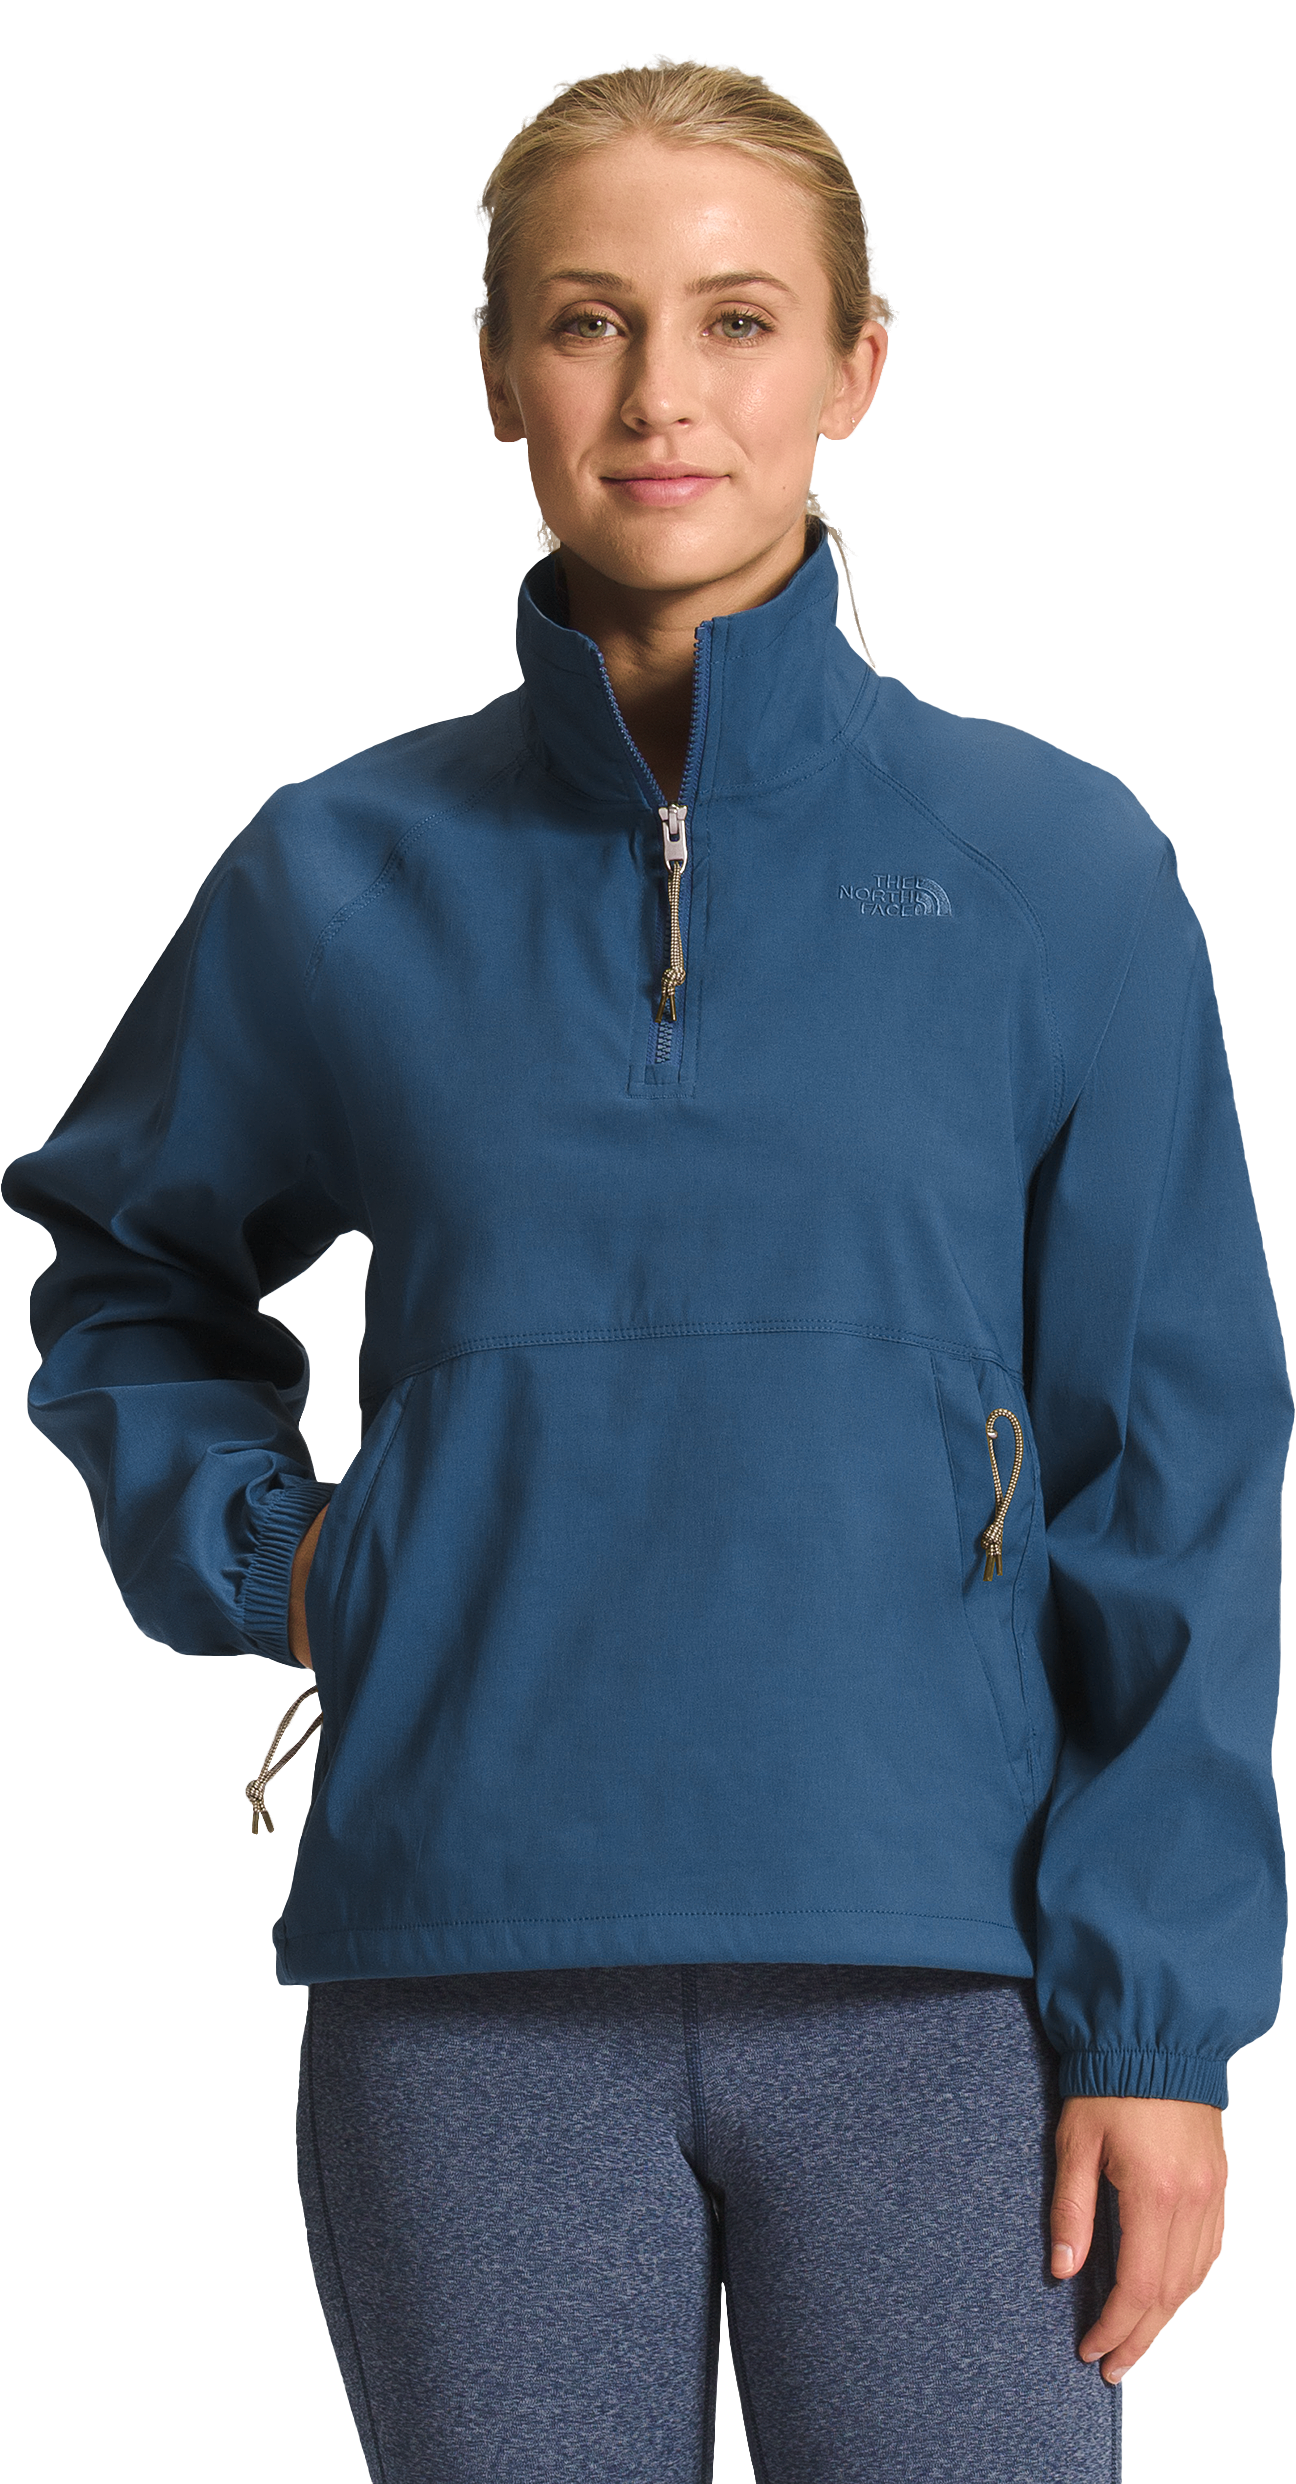 The North Face Class V Pullover Jacket for Ladies - Shady Blue - XL